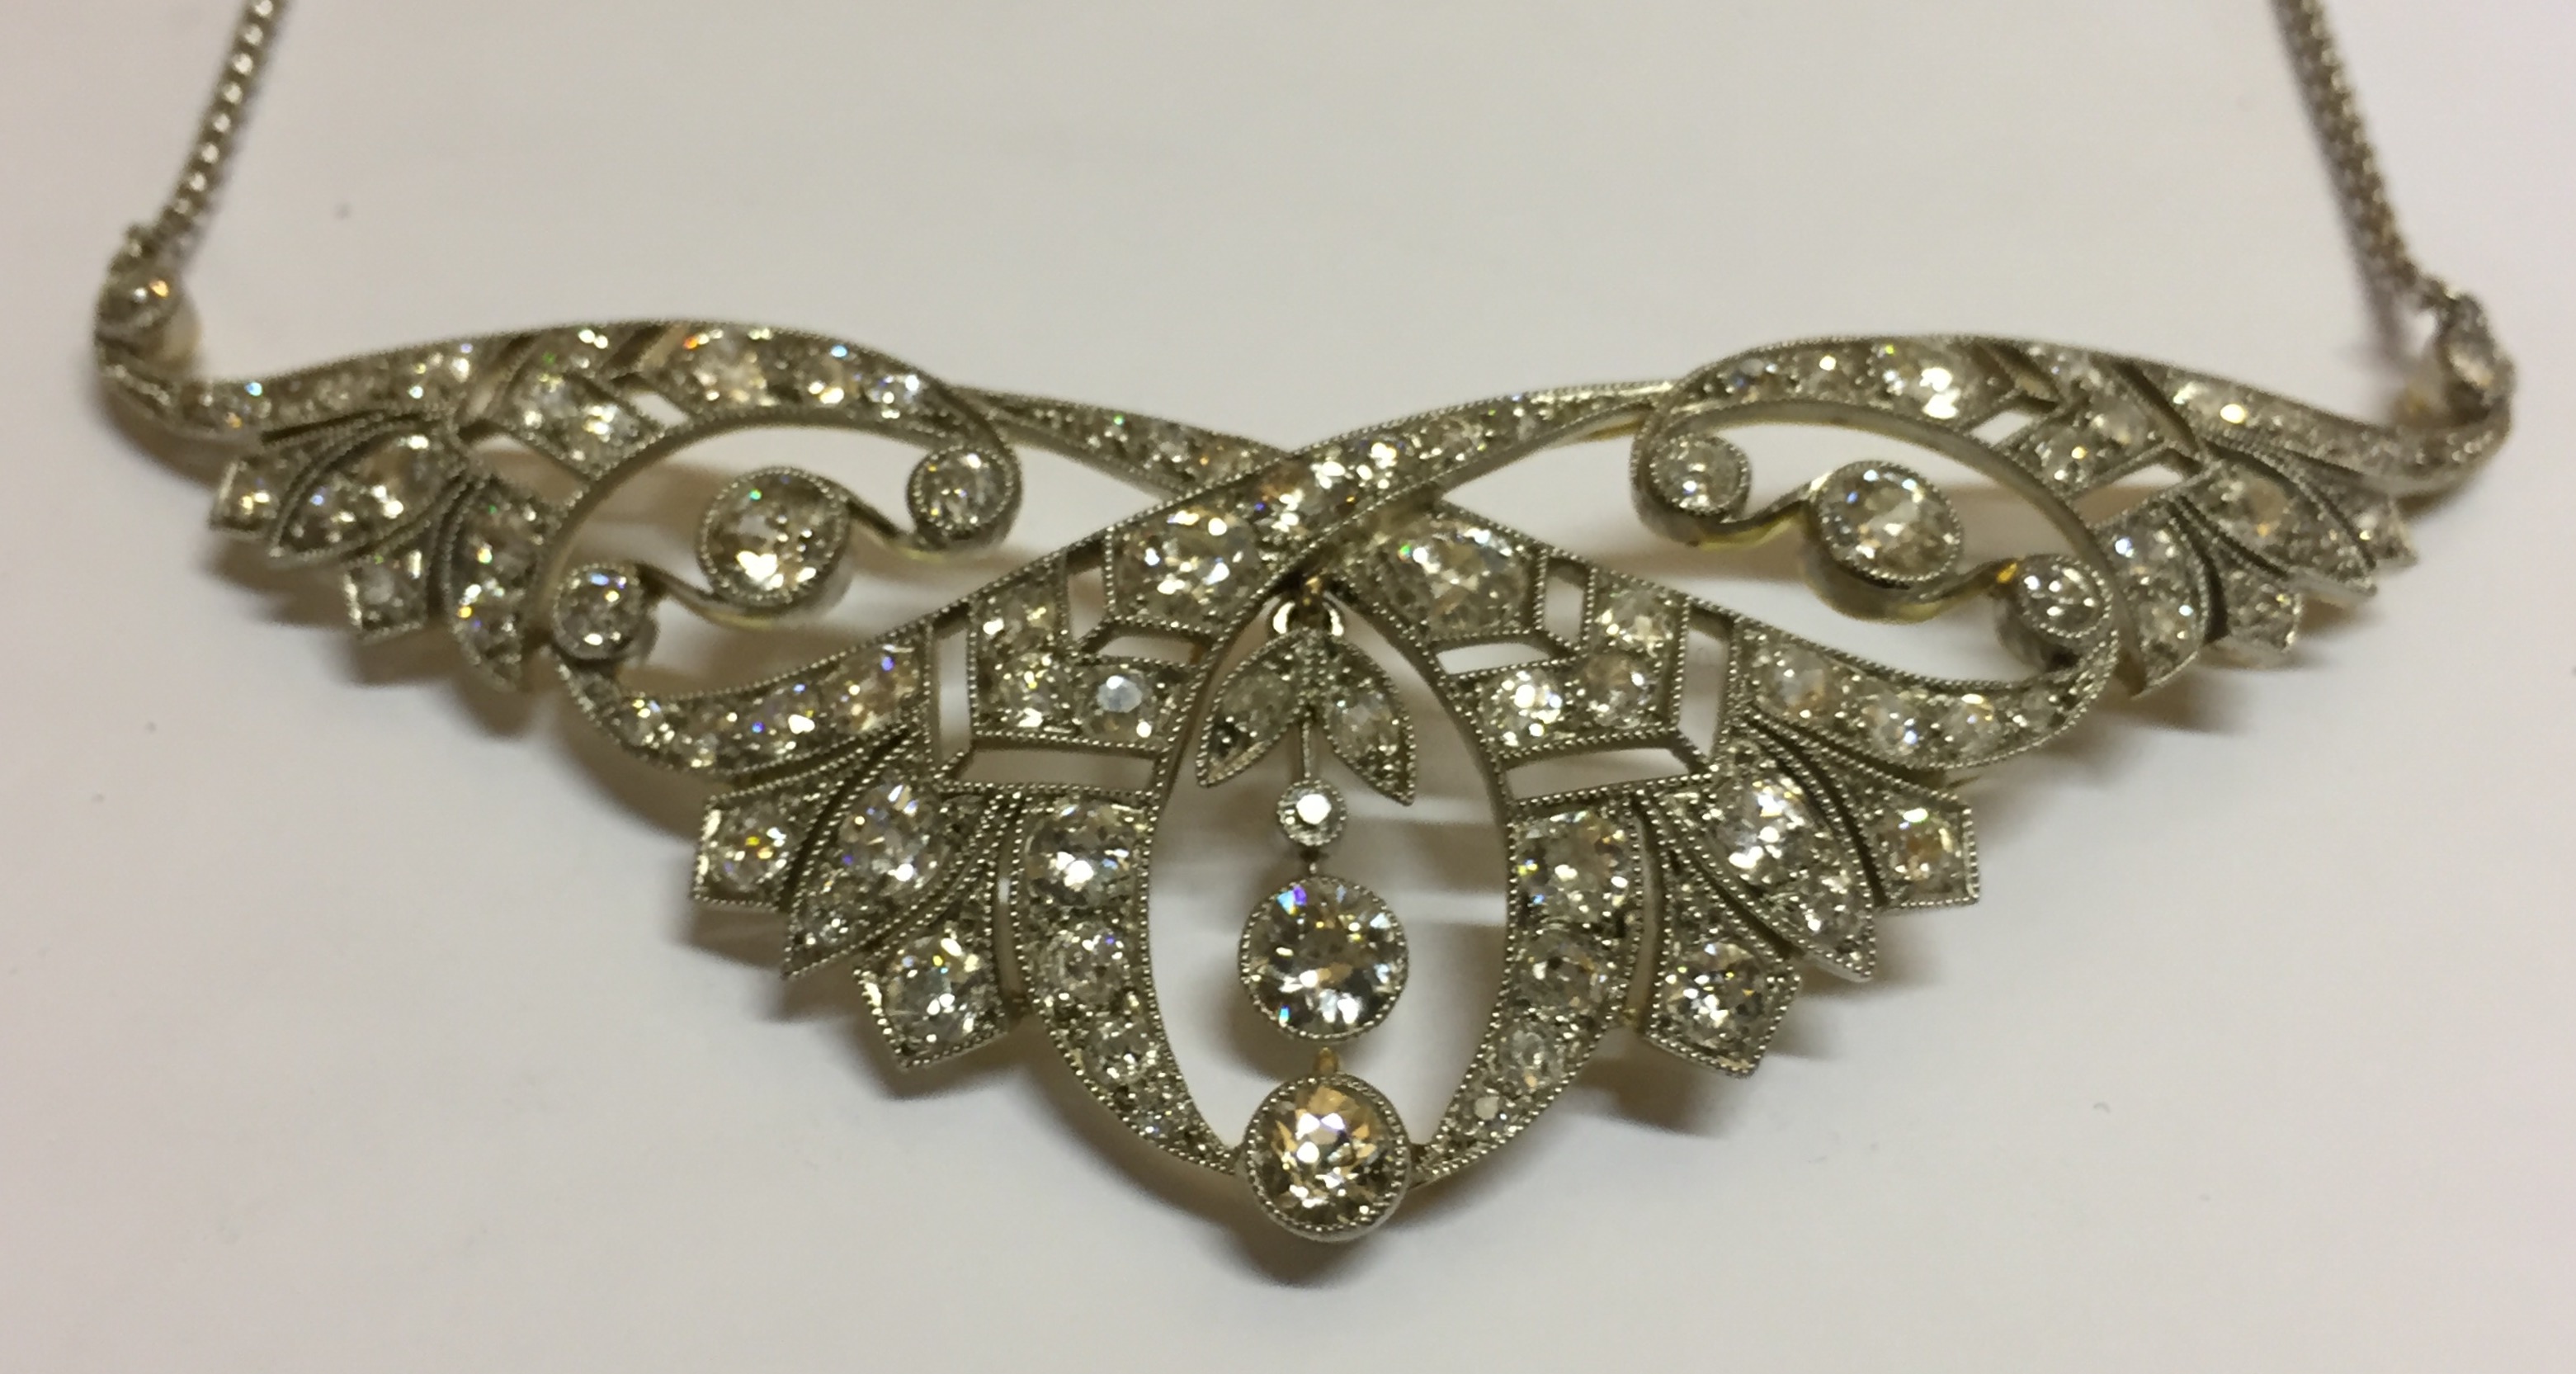 A 18CT GOLD, PLATINUM AND DIAMOND 'TIARA' NECKLACE Having approximately eighty round cut diamonds